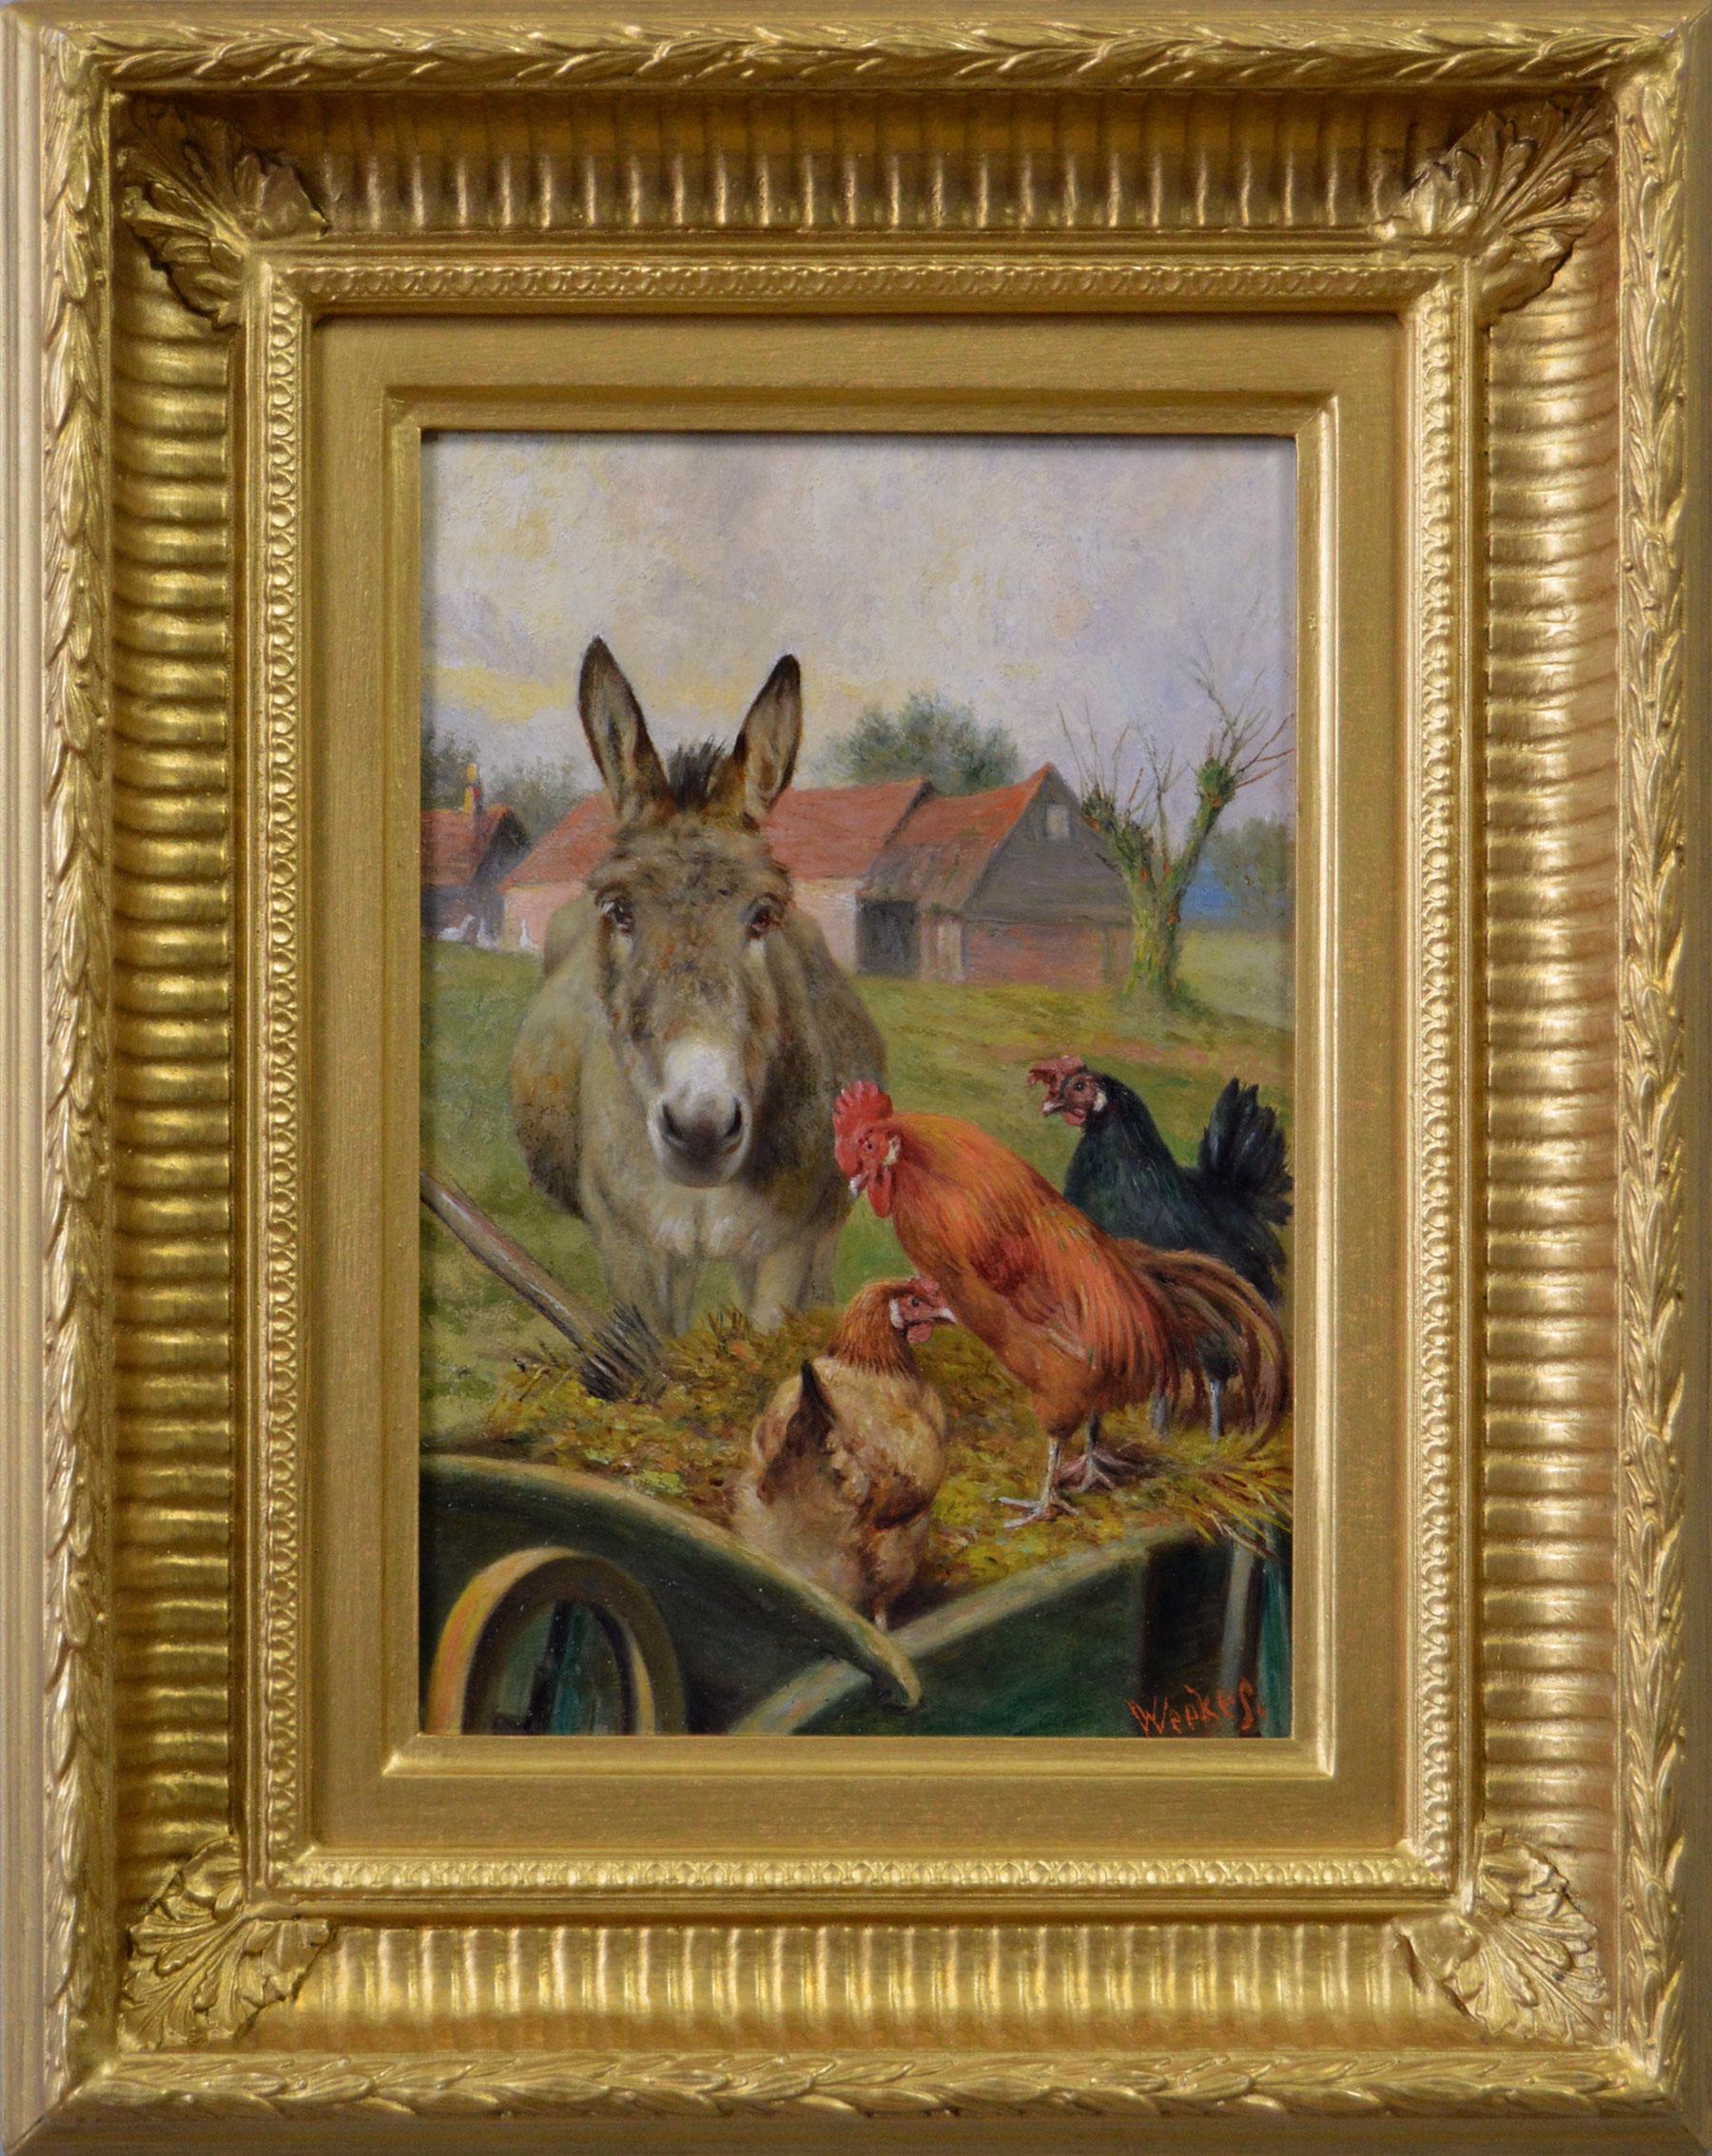 Herbert William Weekes Animal Painting - 19th Century genre oil painting of a donkey with a cockerel & hens